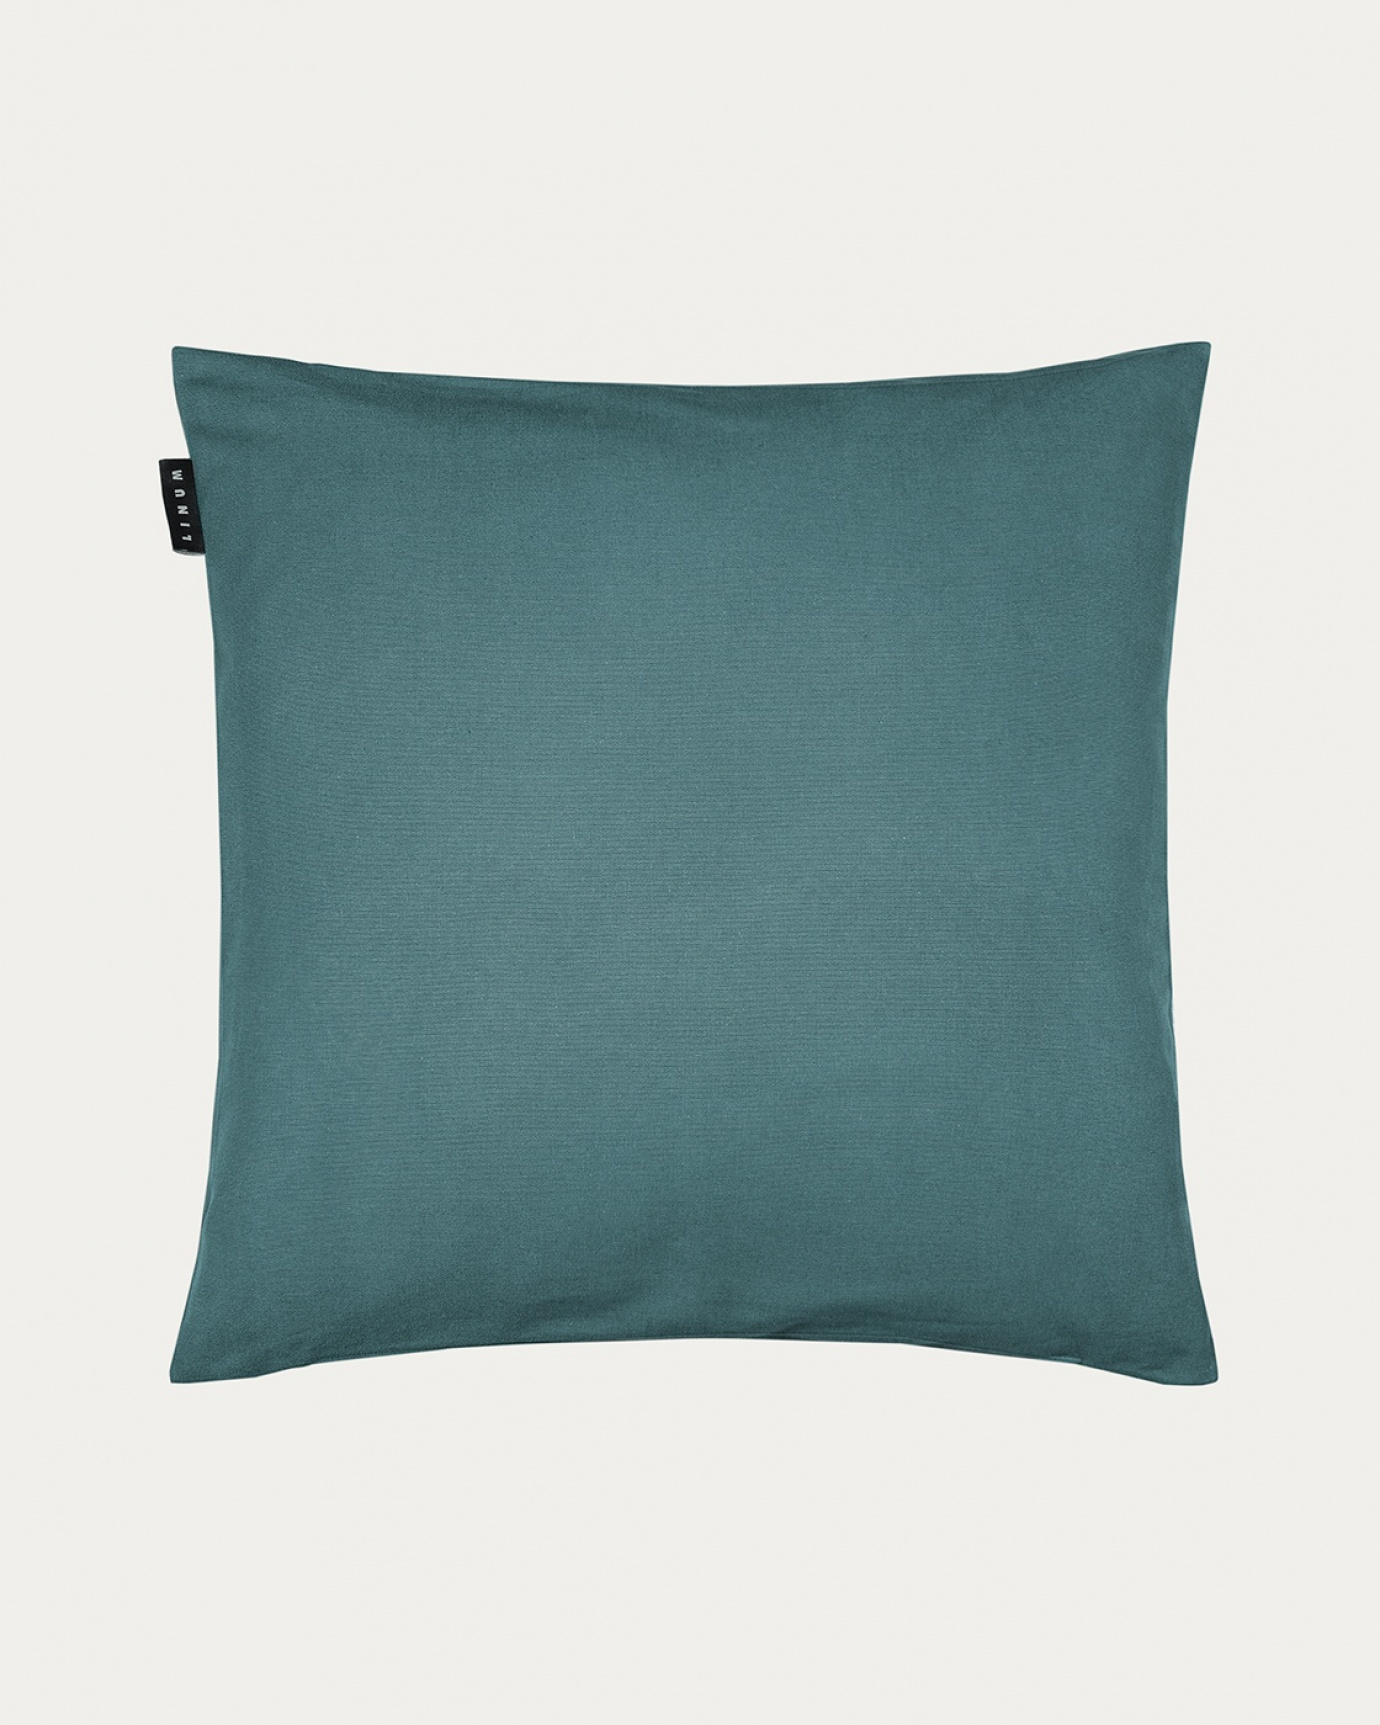 Product image dark grey turquoise ANNABELL cushion cover made of soft cotton from LINUM DESIGN. Size 50x50 cm.